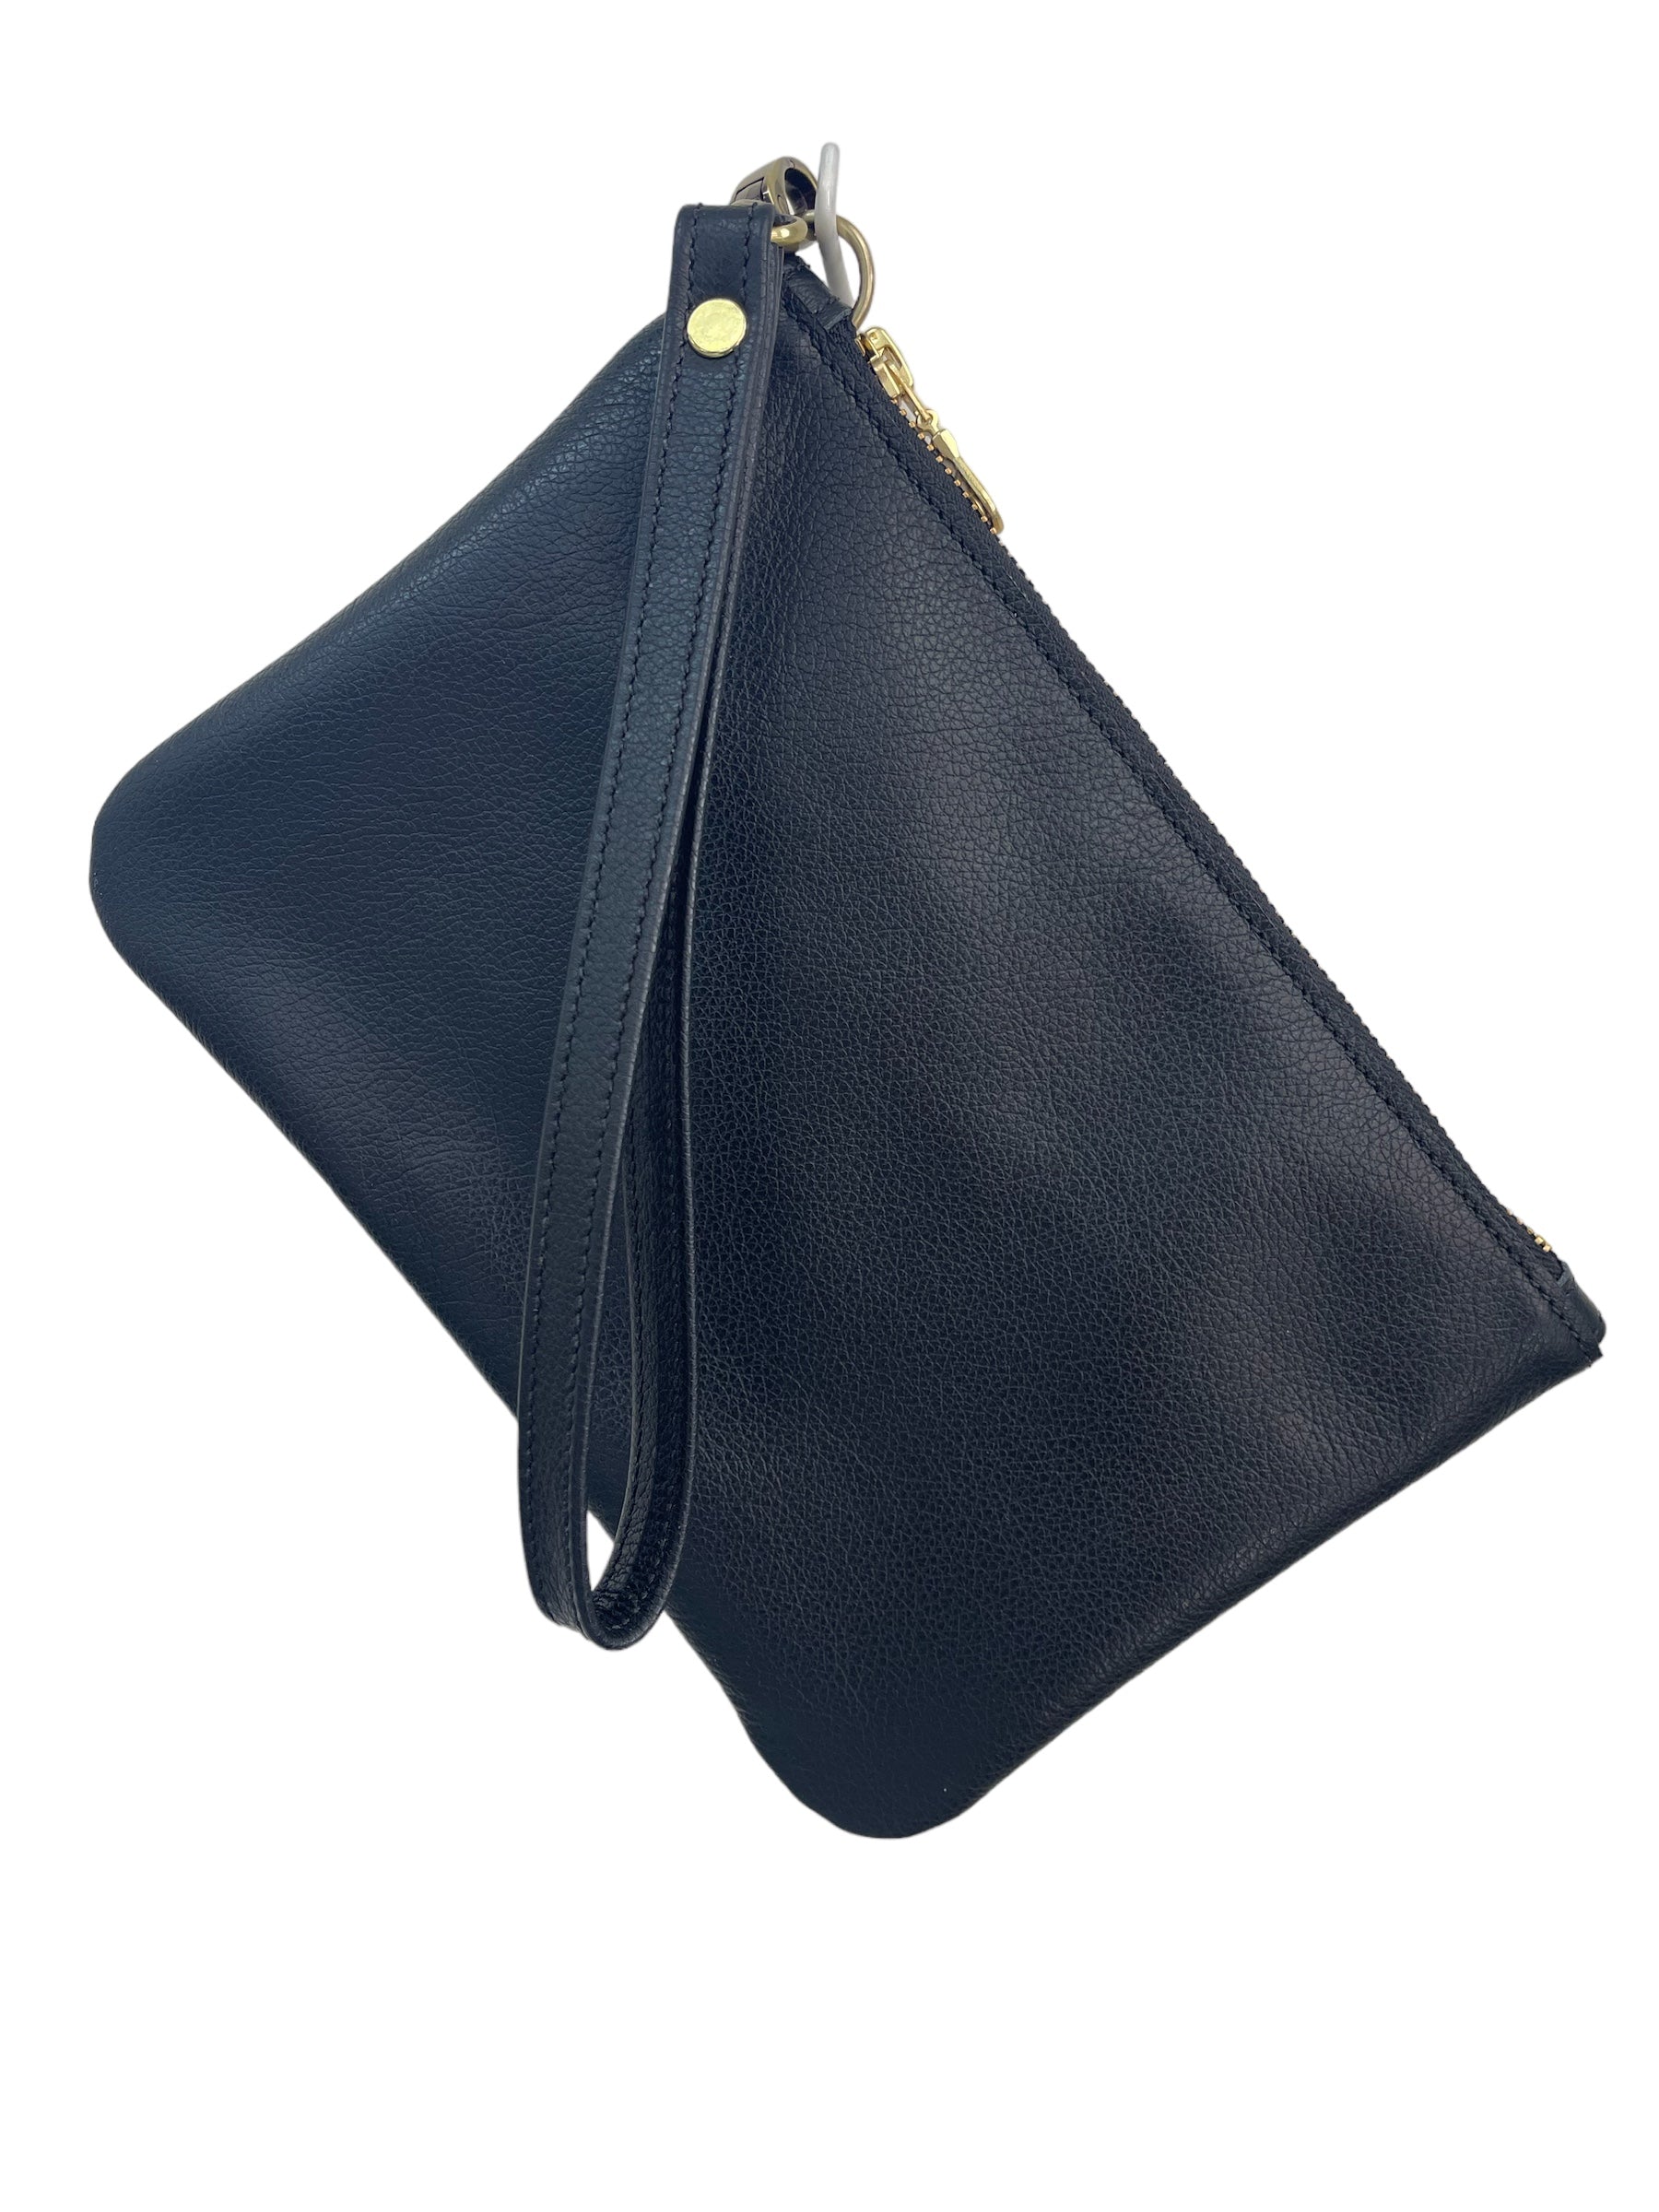 Andover Clutch Black Leather #008